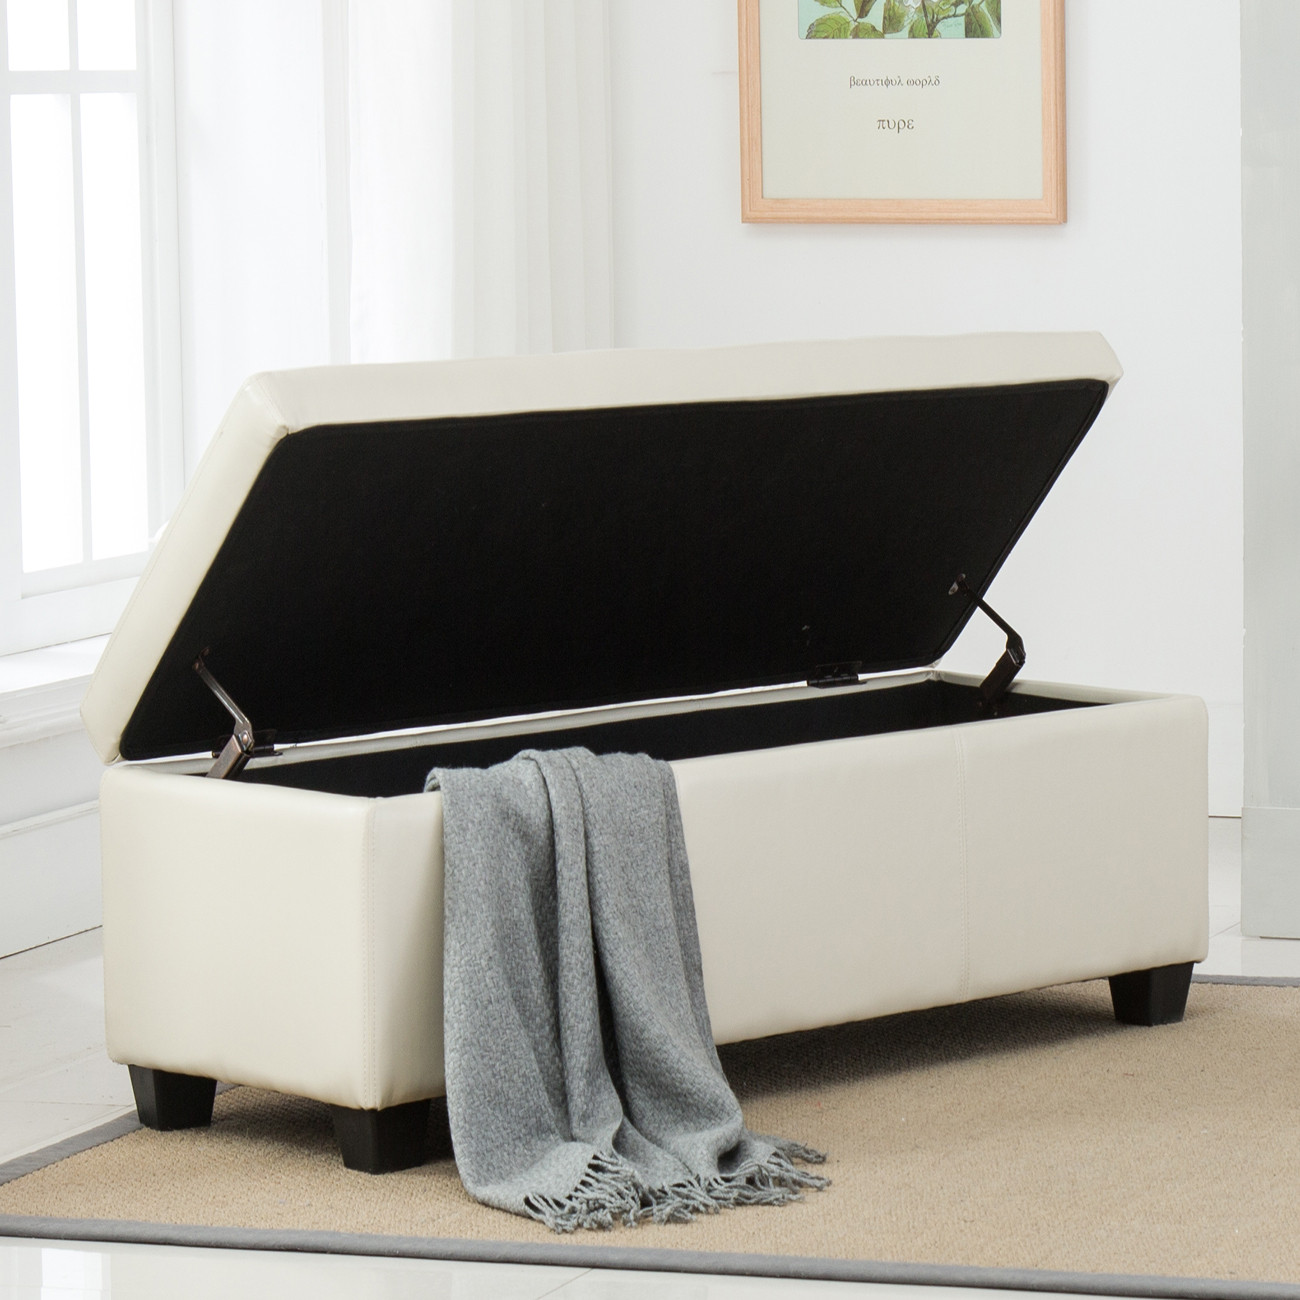 Storage Ottoman For Bedroom
 NEW Ottoman Storage Long footrest bench Modern bedroom